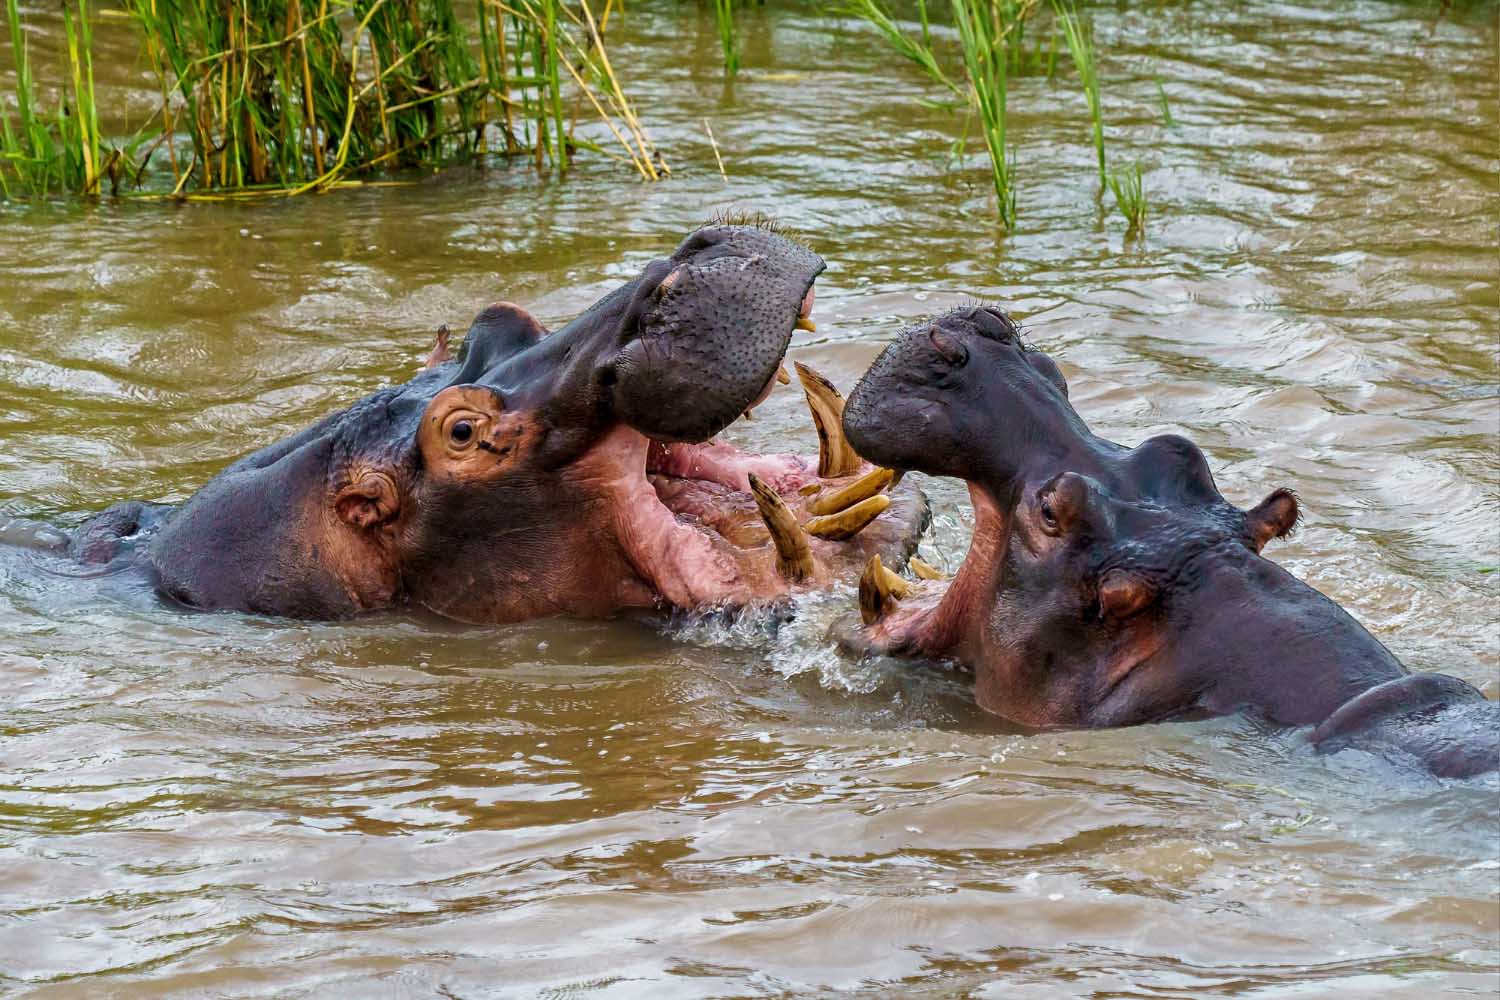 hippos-playing-each-other-water-during-daytime